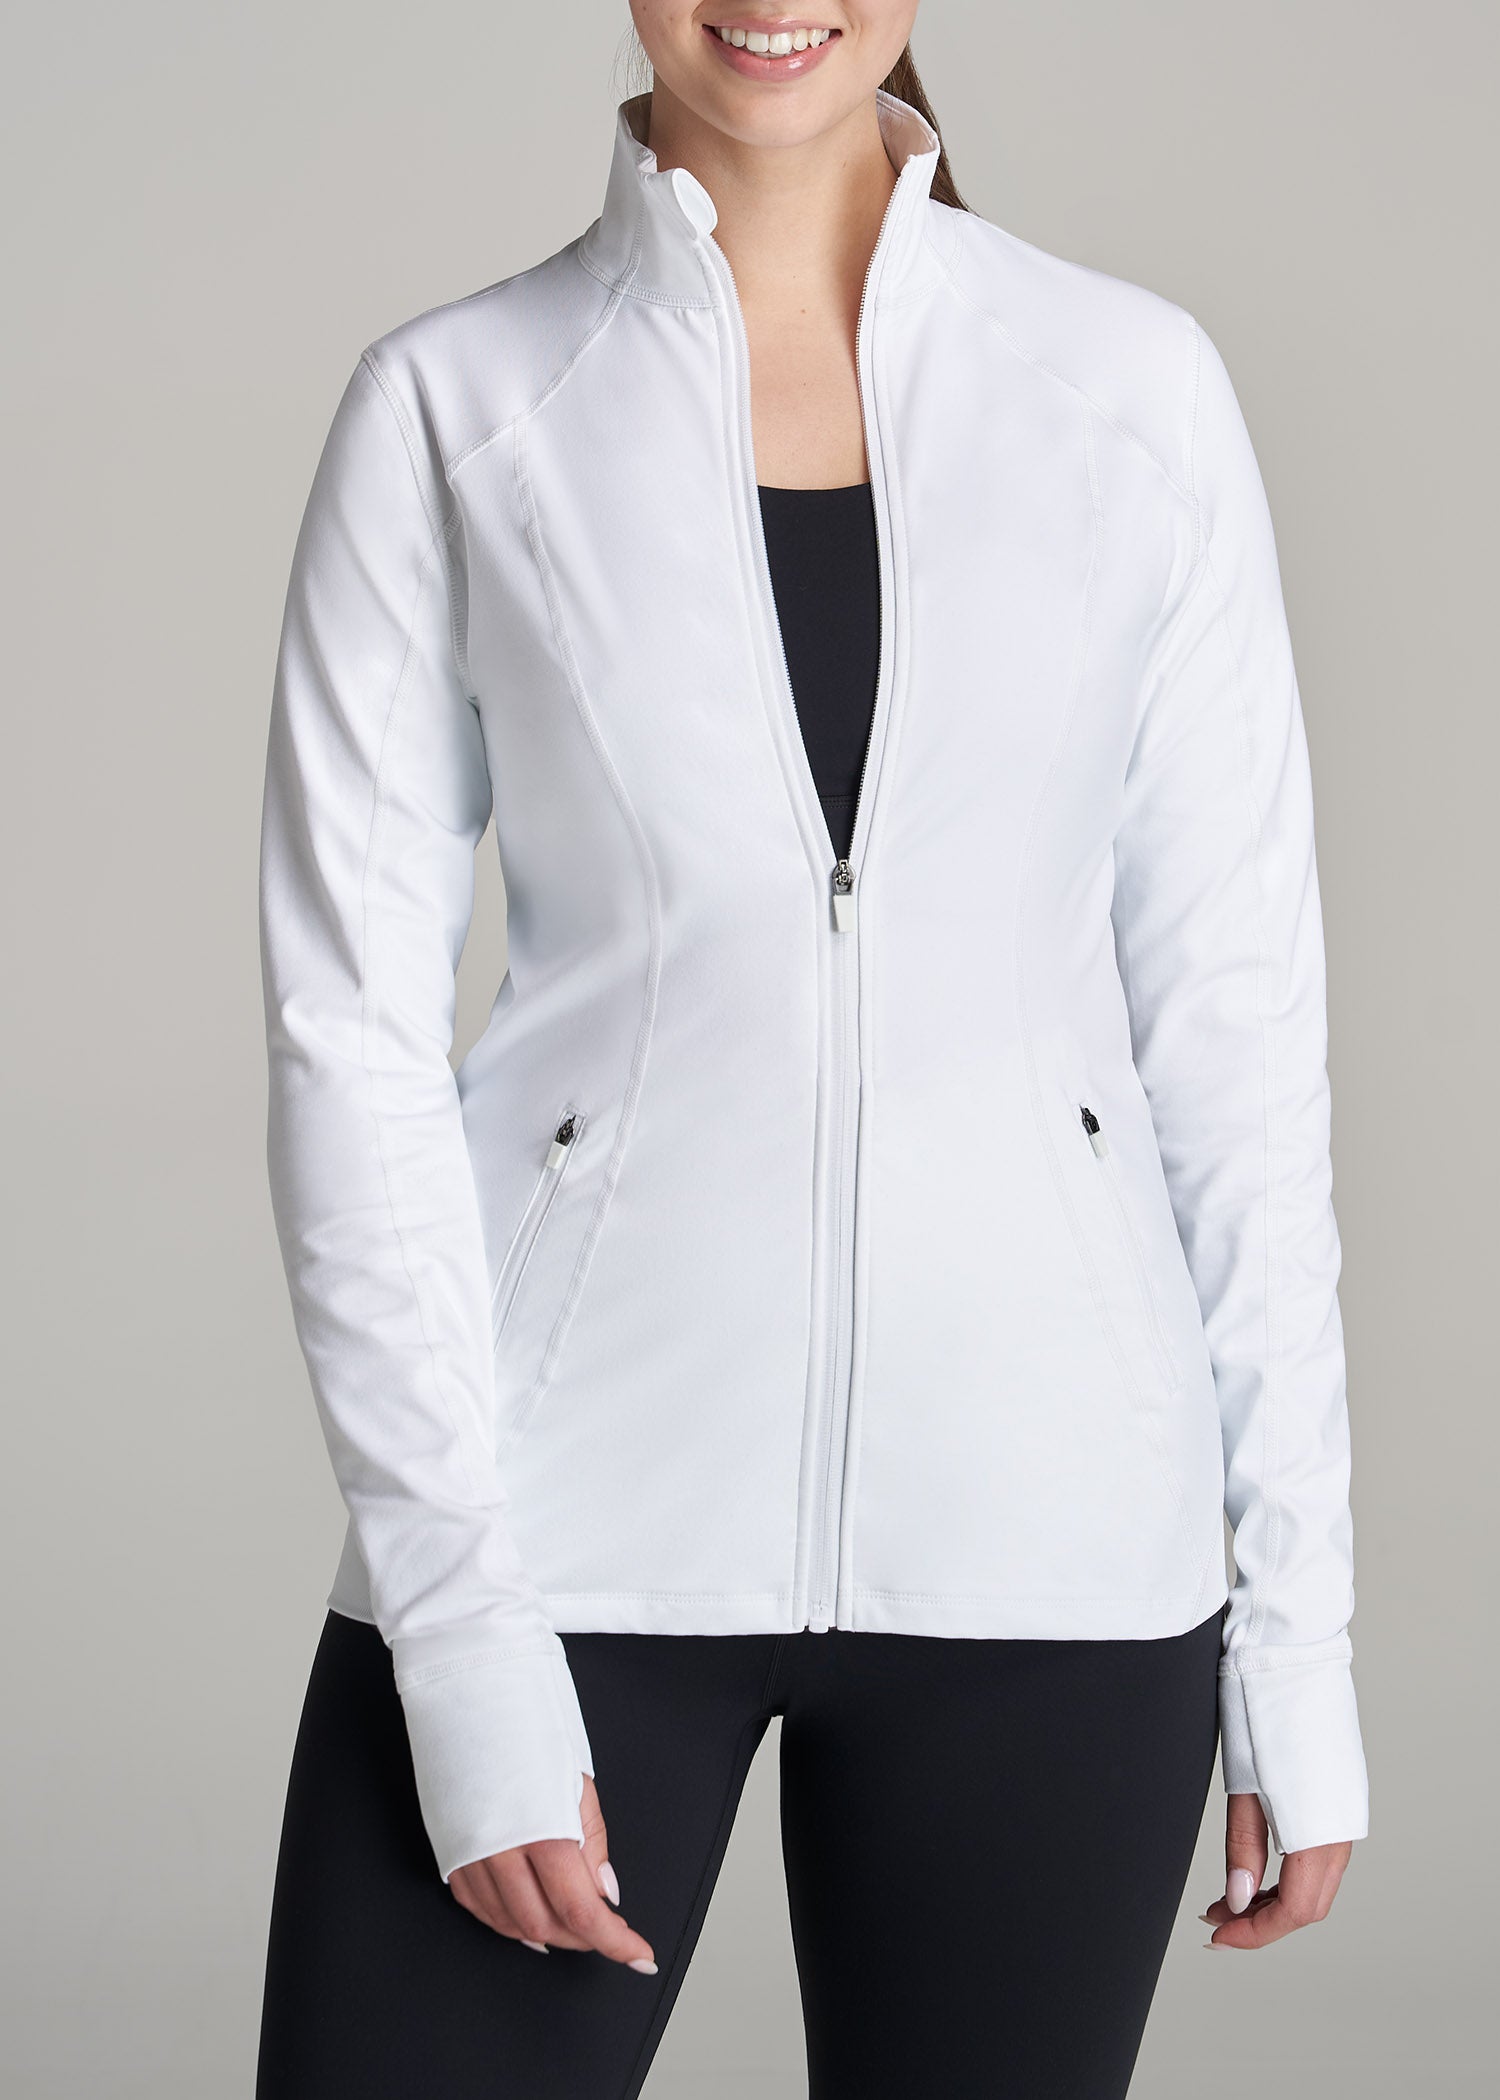 Women's Athletic Zip-Up Jacket in Bright White